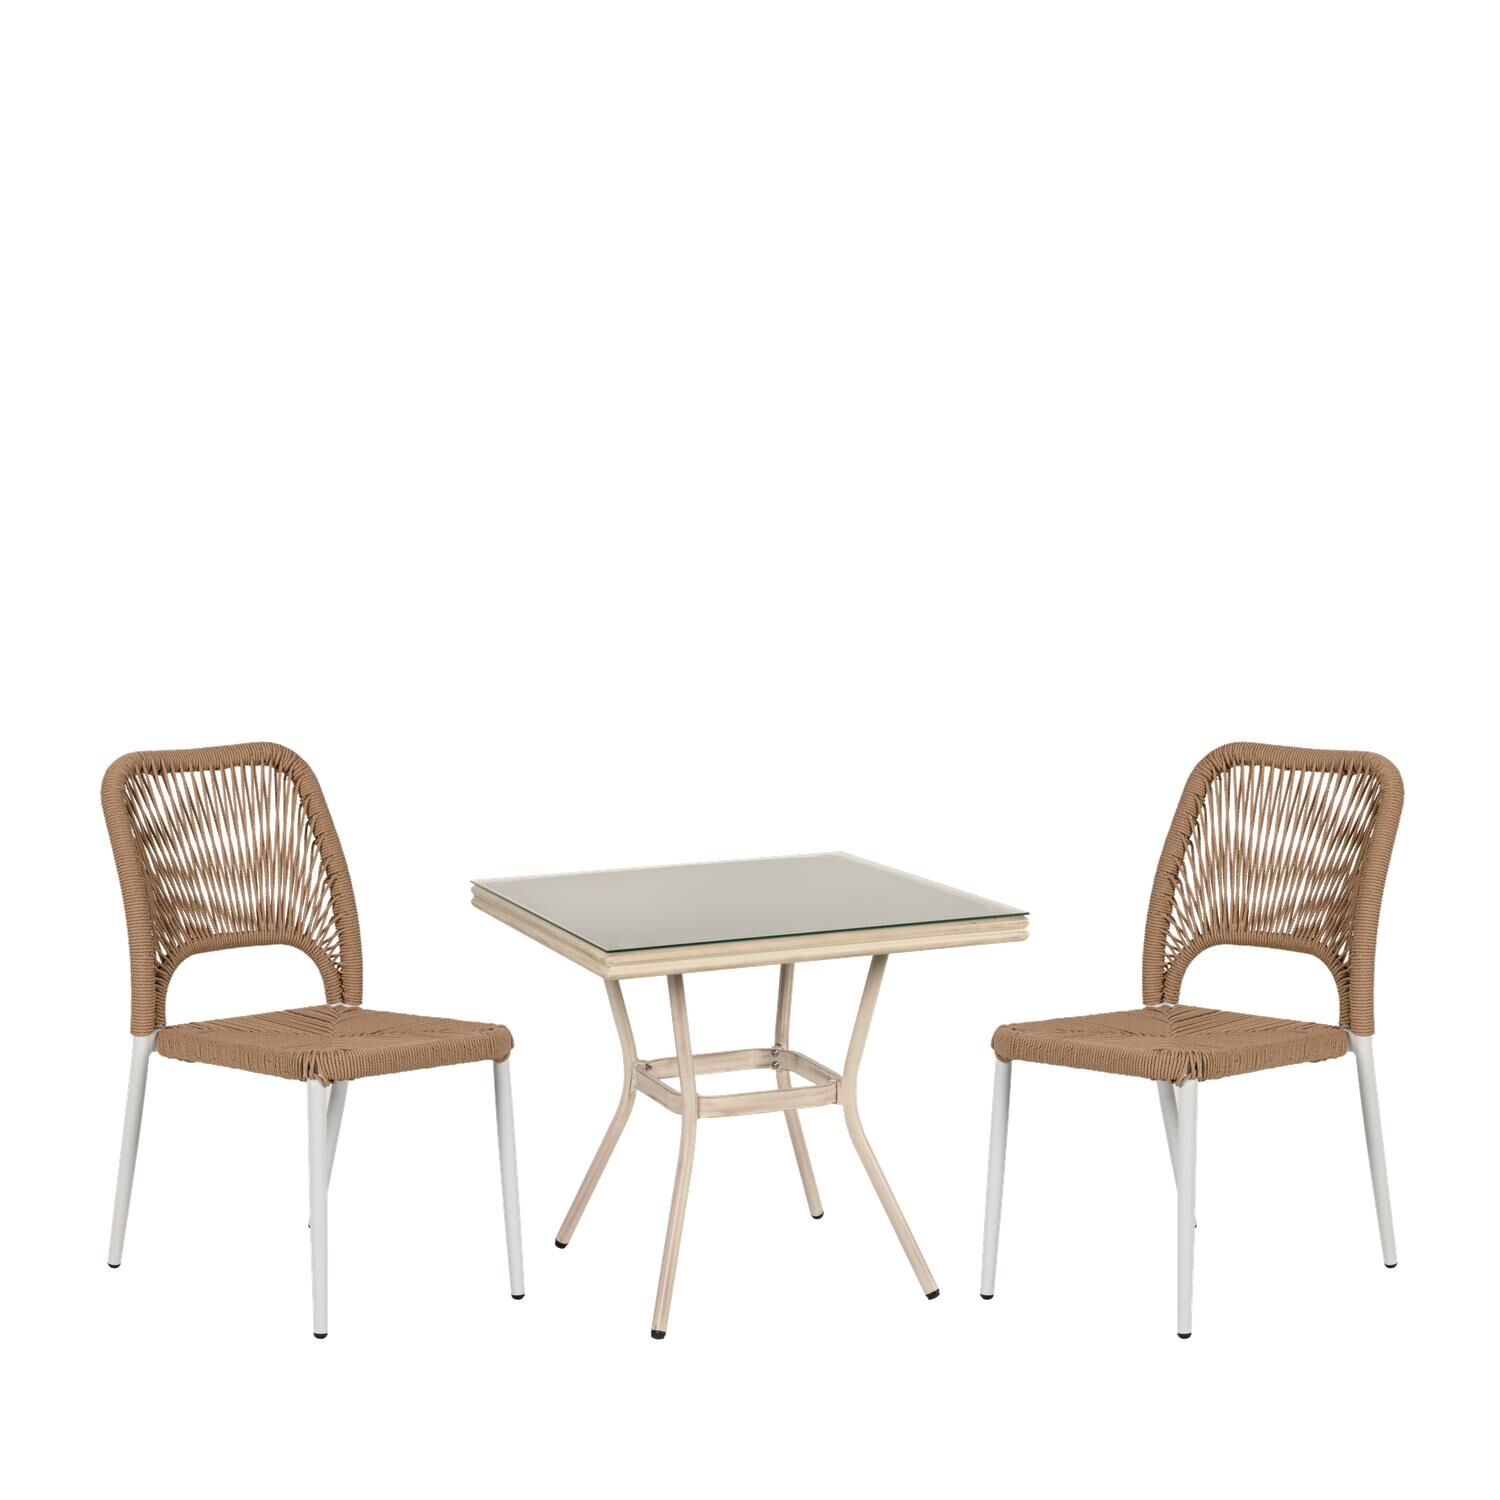 ANGOLA Garden Dining Set Antique White With 2 Chairs 14990258